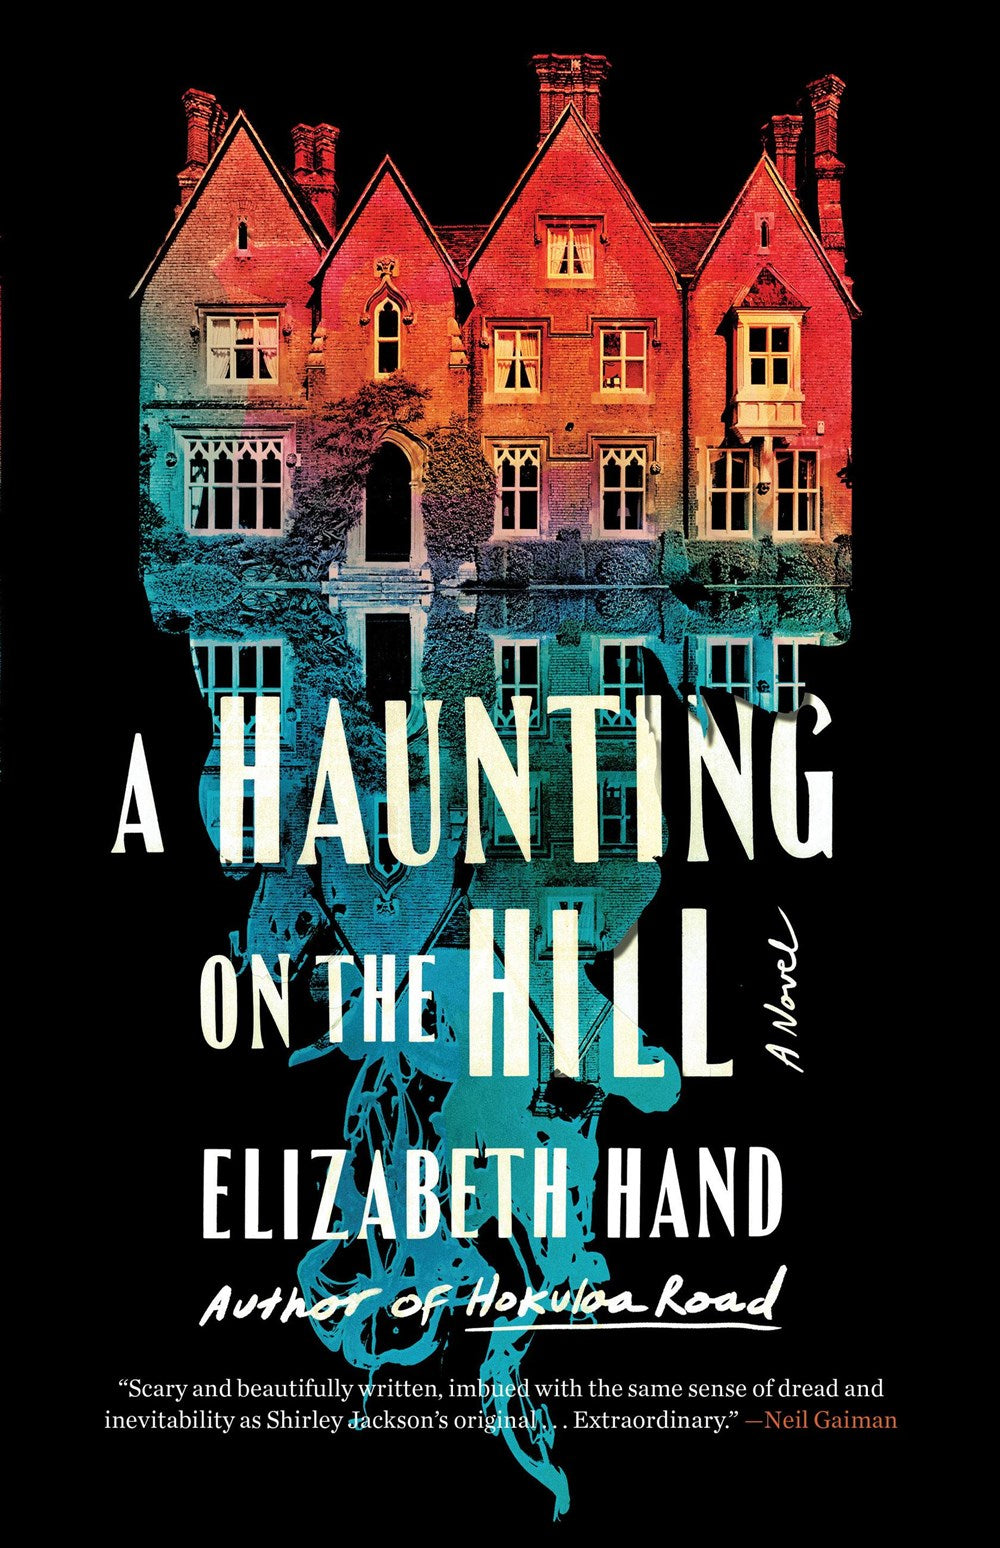 A Haunting on the Hill - Elizabeth Hand